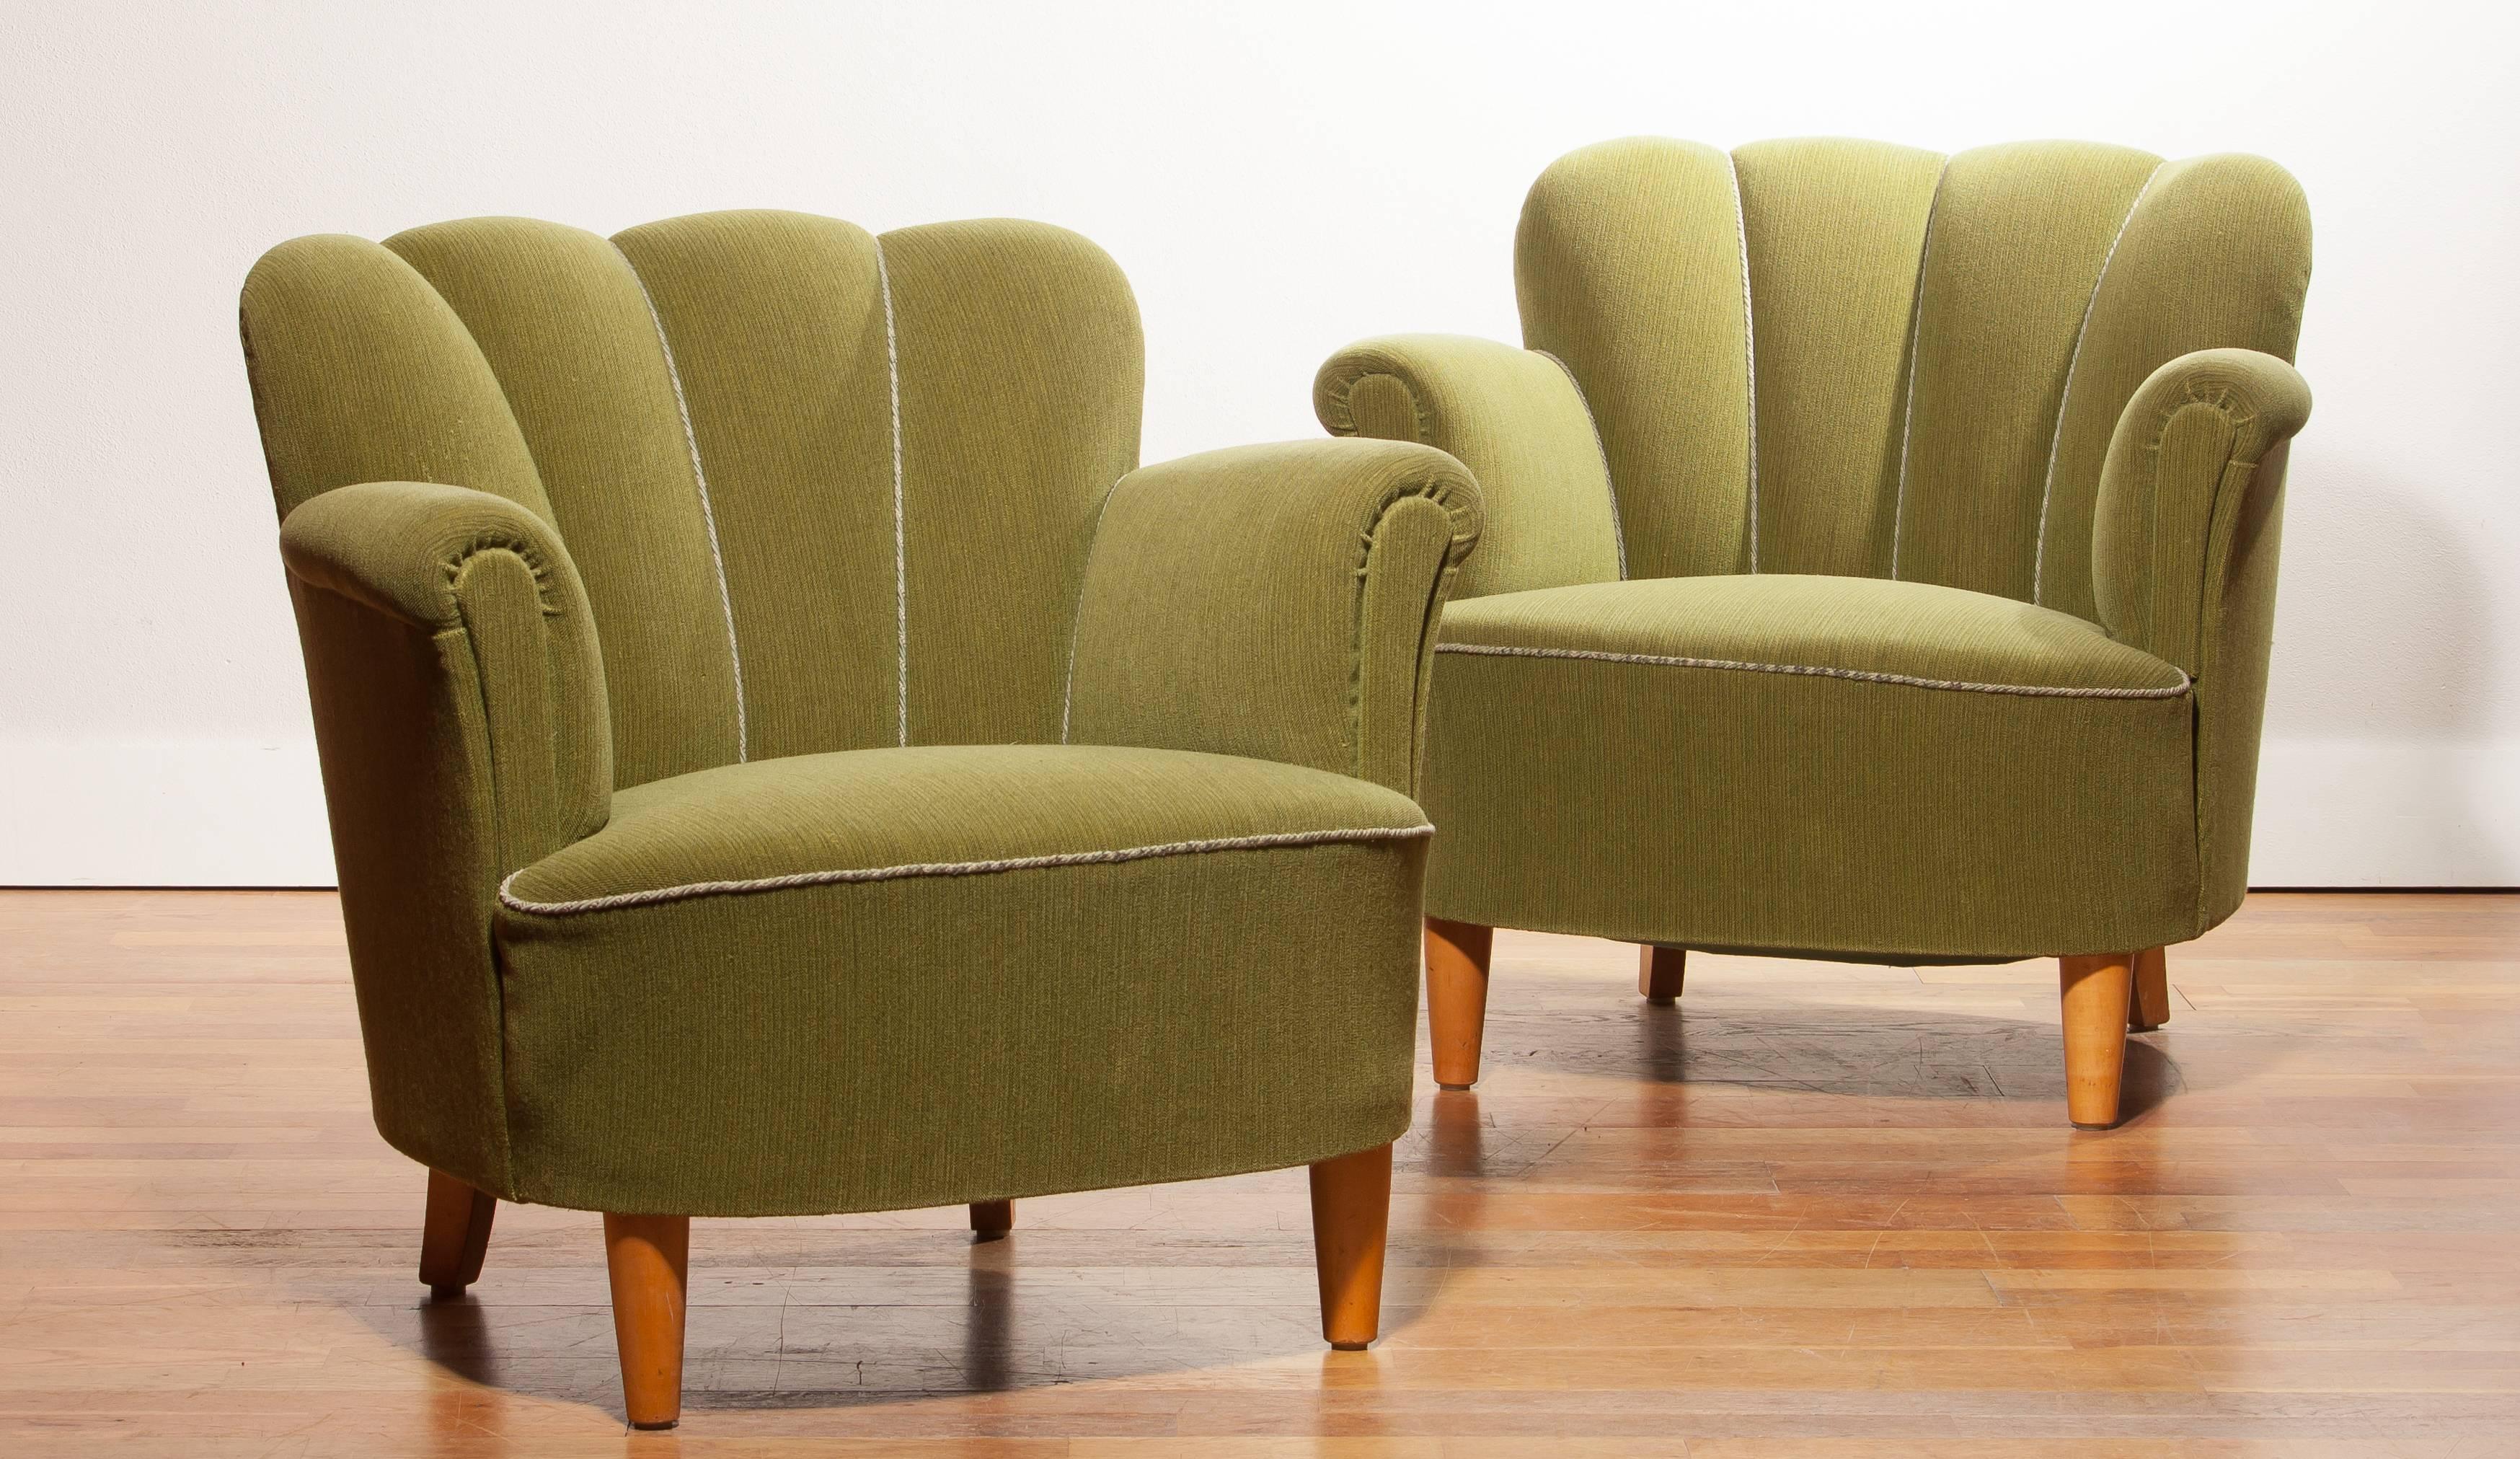 Beautiful club chairs from Sweden.
The back of the chairs have a nice fluted form and looking very elegant with the green upholstery and the beech legs.
They are in a very good condition.
Period 1940s
Dimensions: H 75 cm, W 82 cm, D 62 cm, SH 39